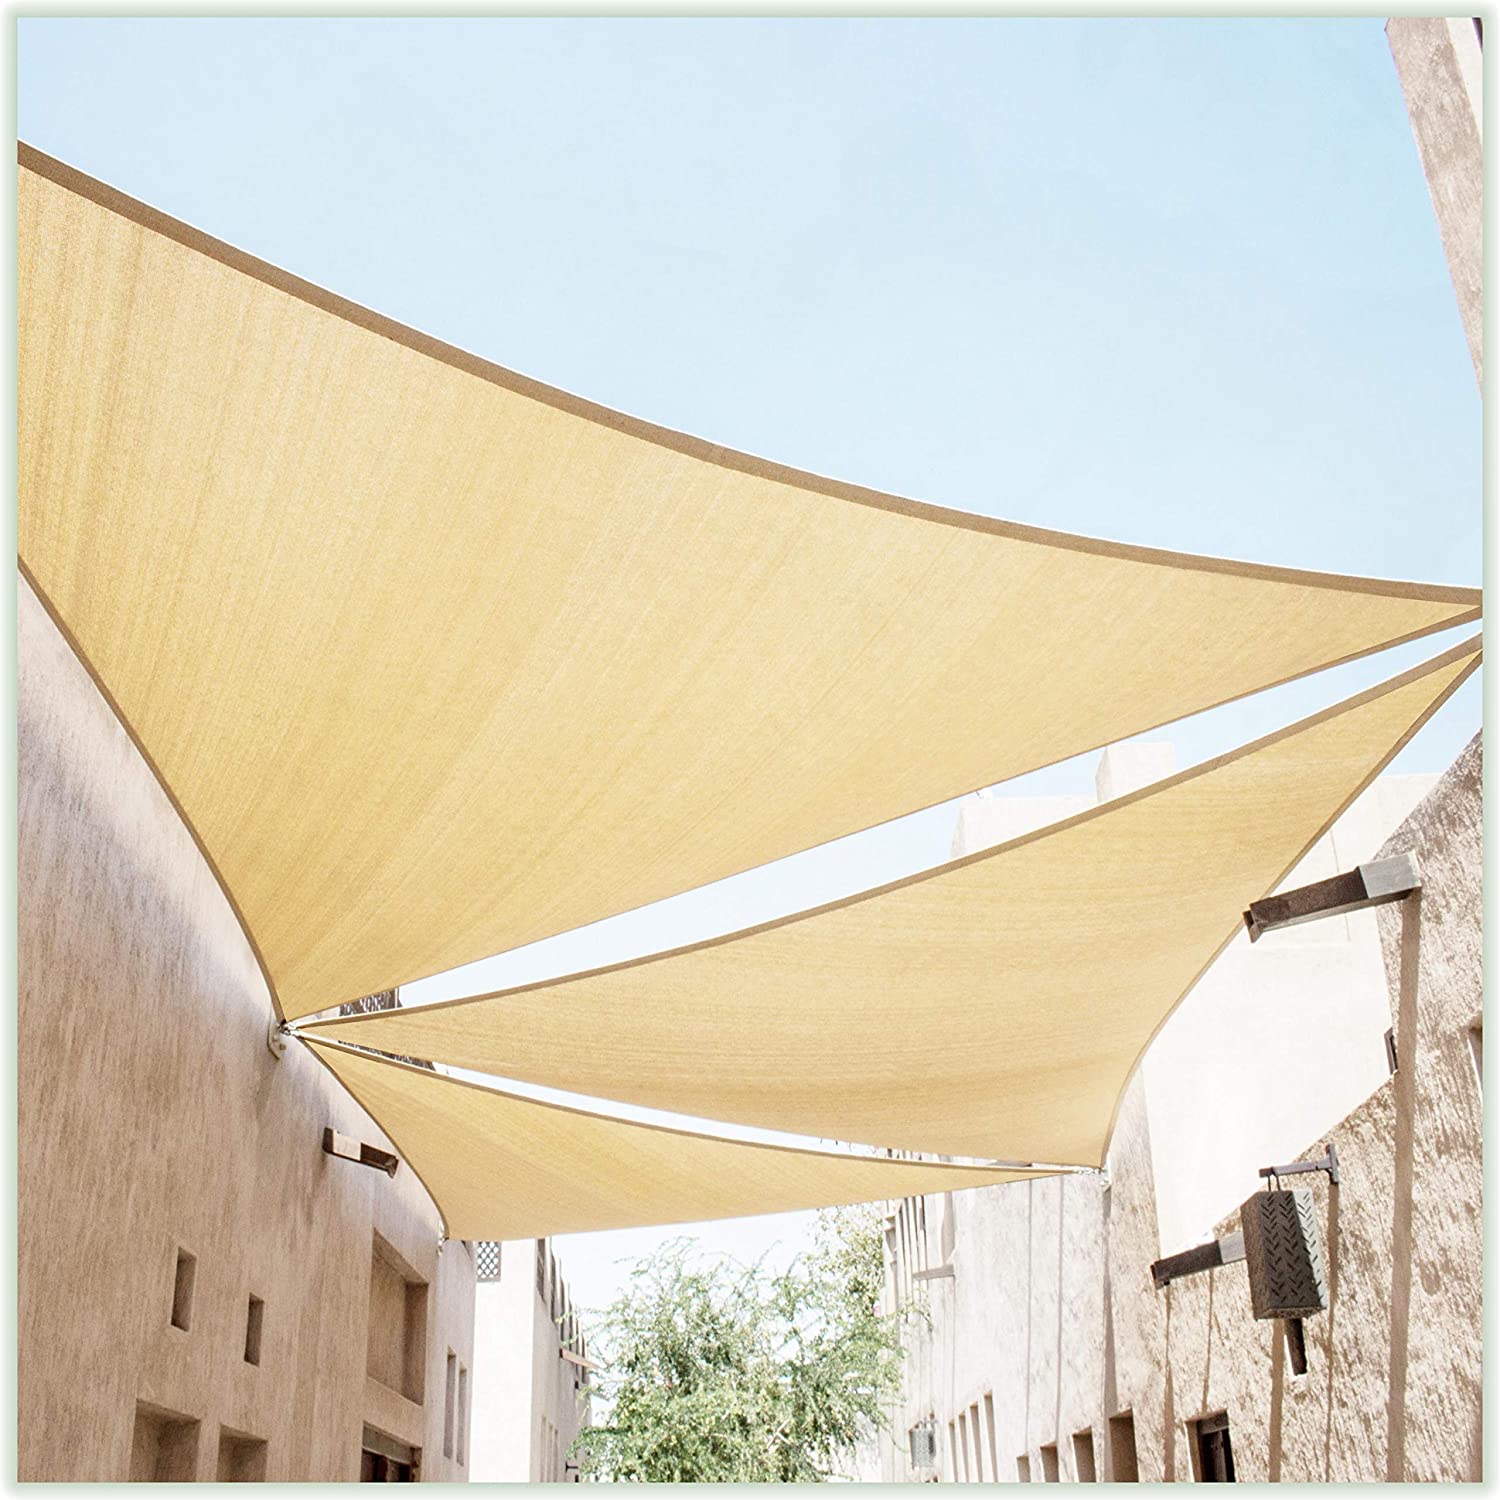 Review of ColourTree 20' x 20' x 20' Beige Triangle TAPT20 Sun Shade Sail Canopy